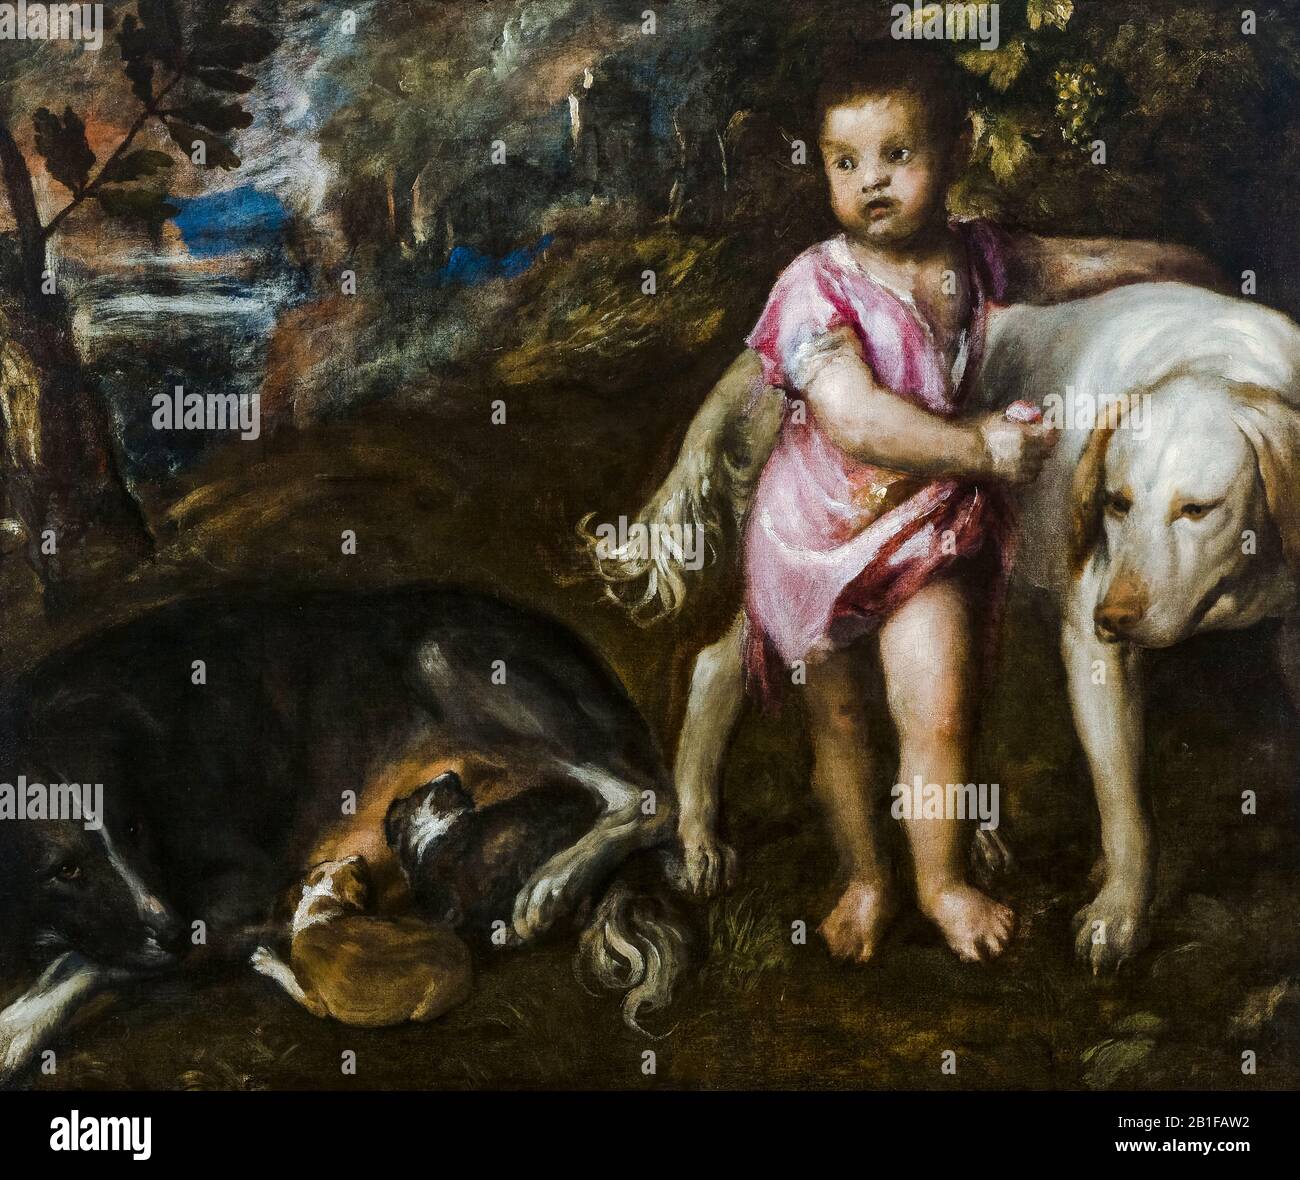 Titian, Tiziano Vecellio, Boy with Dogs in a Landscape, oil on canvas painting, 1565-1576 Stock Photo